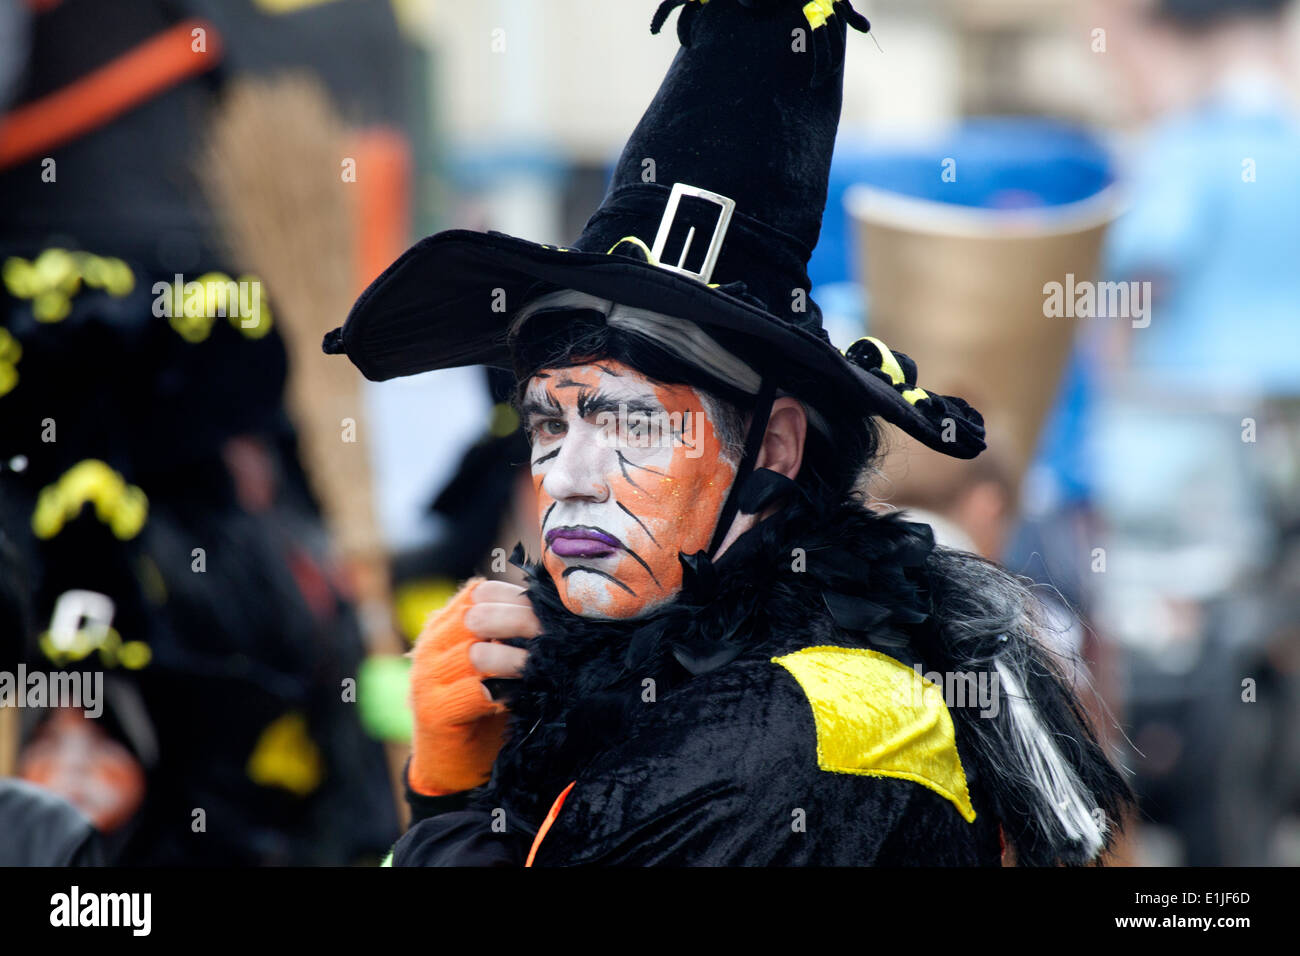 Man parading in traditional witch costume and orange colour face paint, Ostend Carnival, Belgium Stock Photo